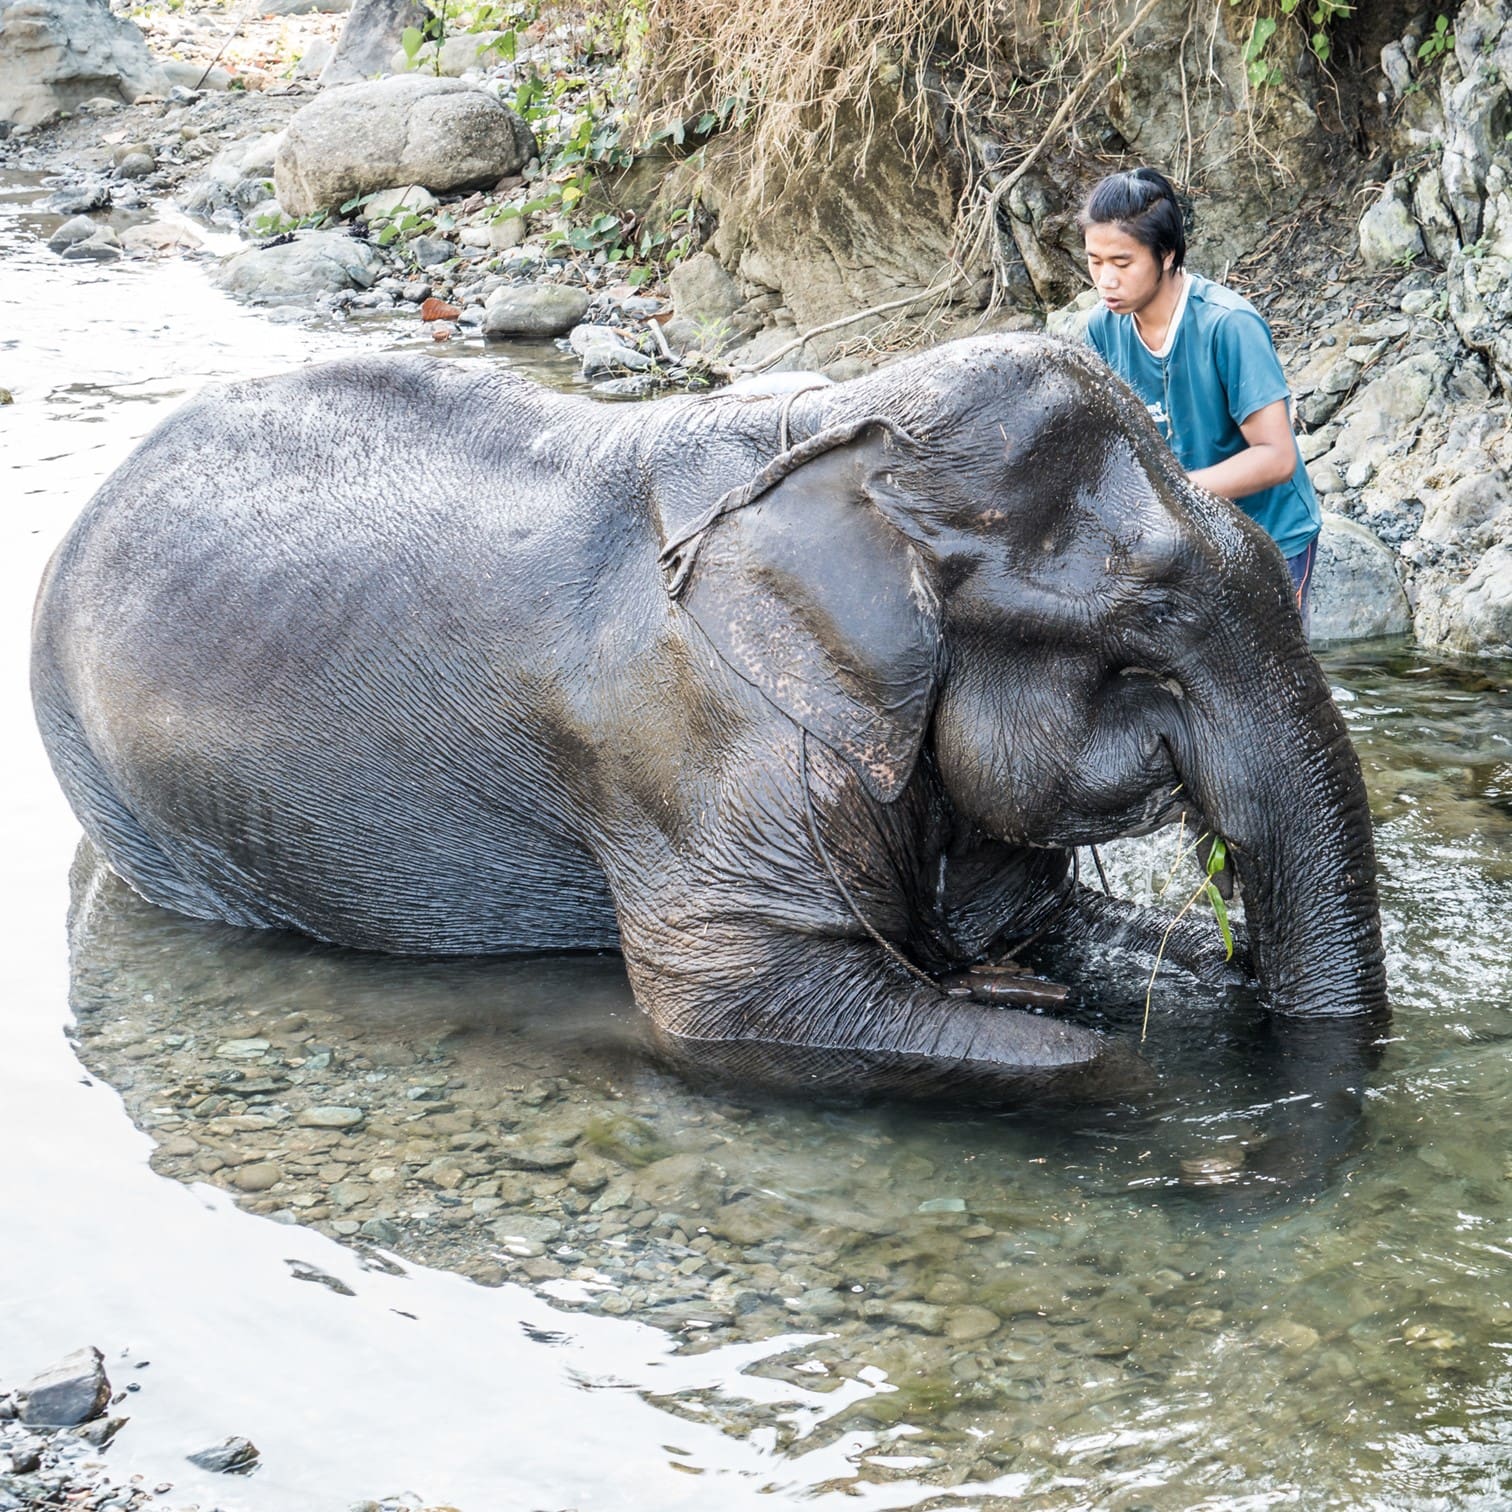 Elephant and owner in a river